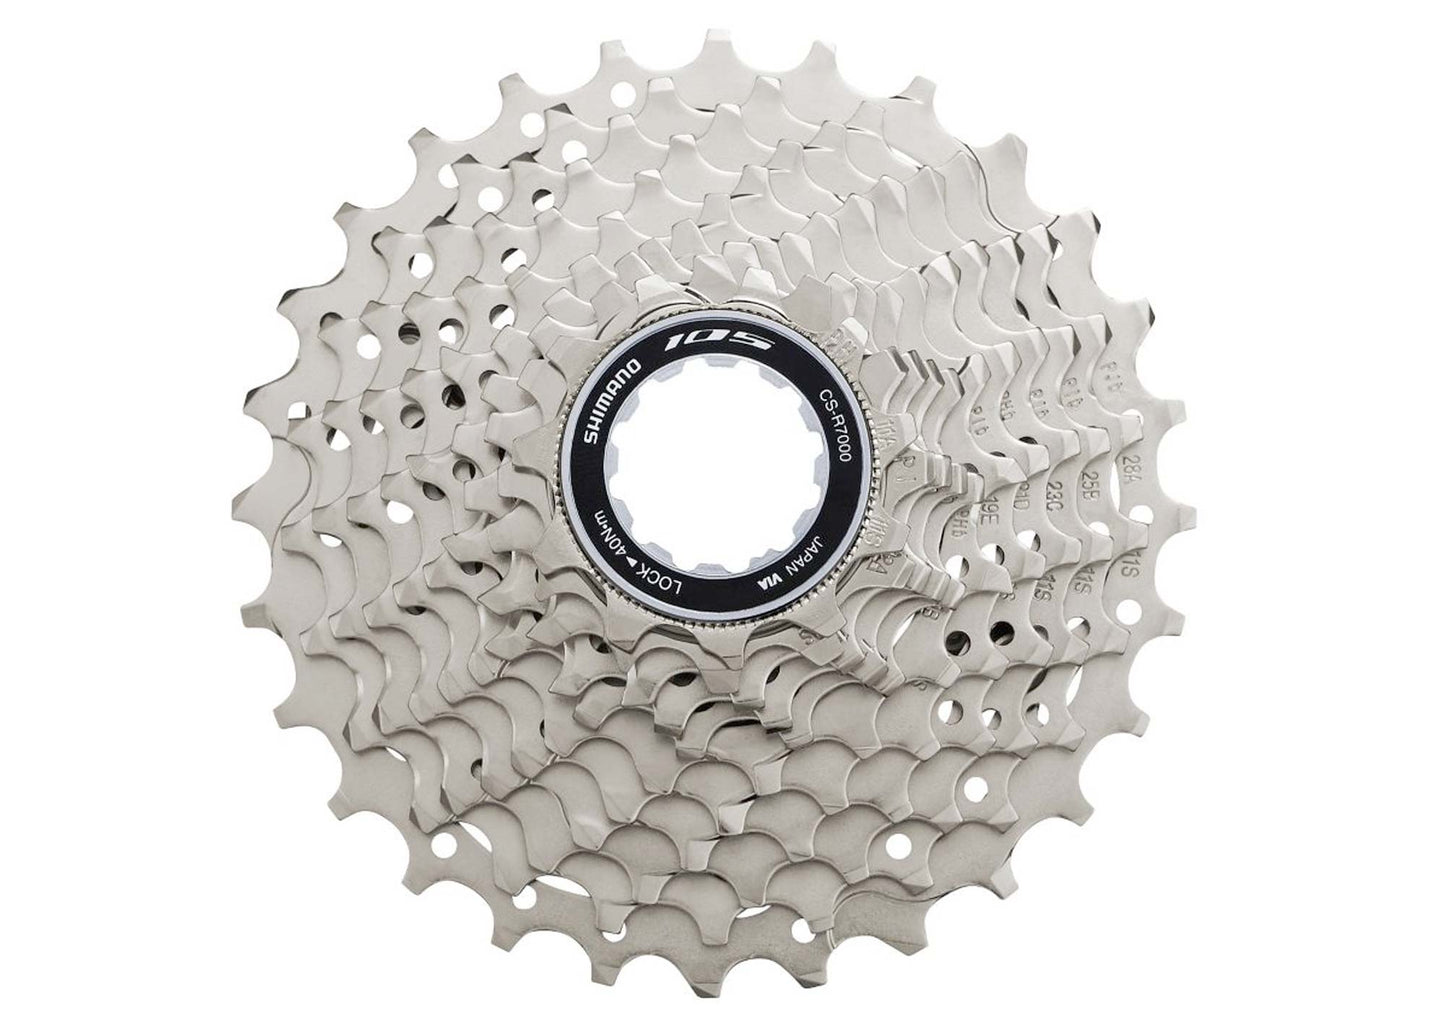 Shimano 105 CS-R7000 Cassette 11-28 tooth, 11 Speed